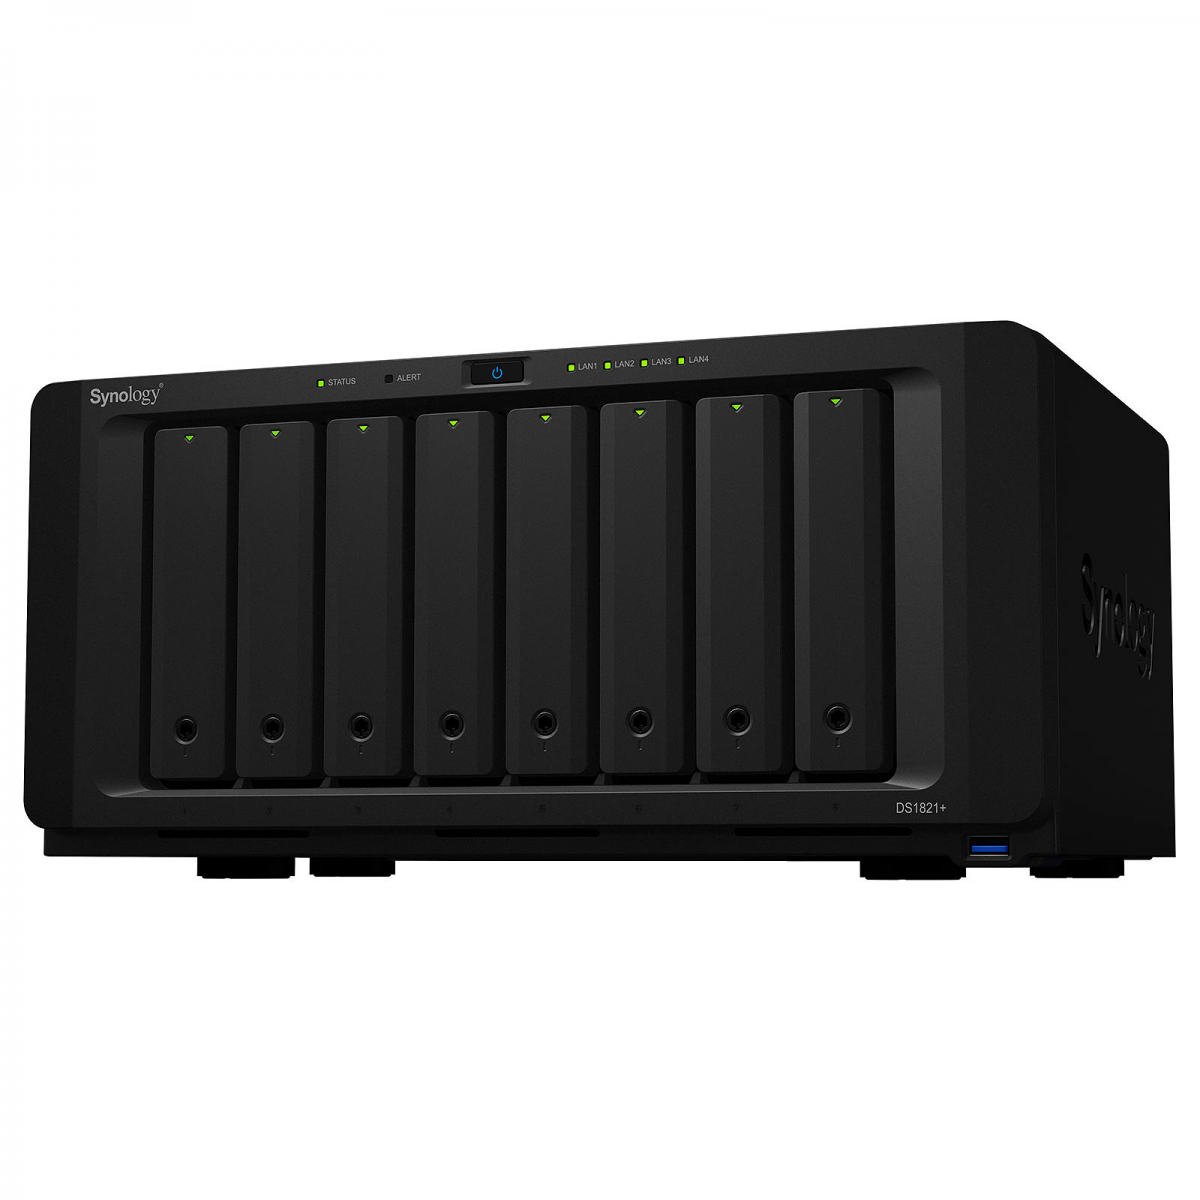 NAS Synology DS1821+  - 8 baies